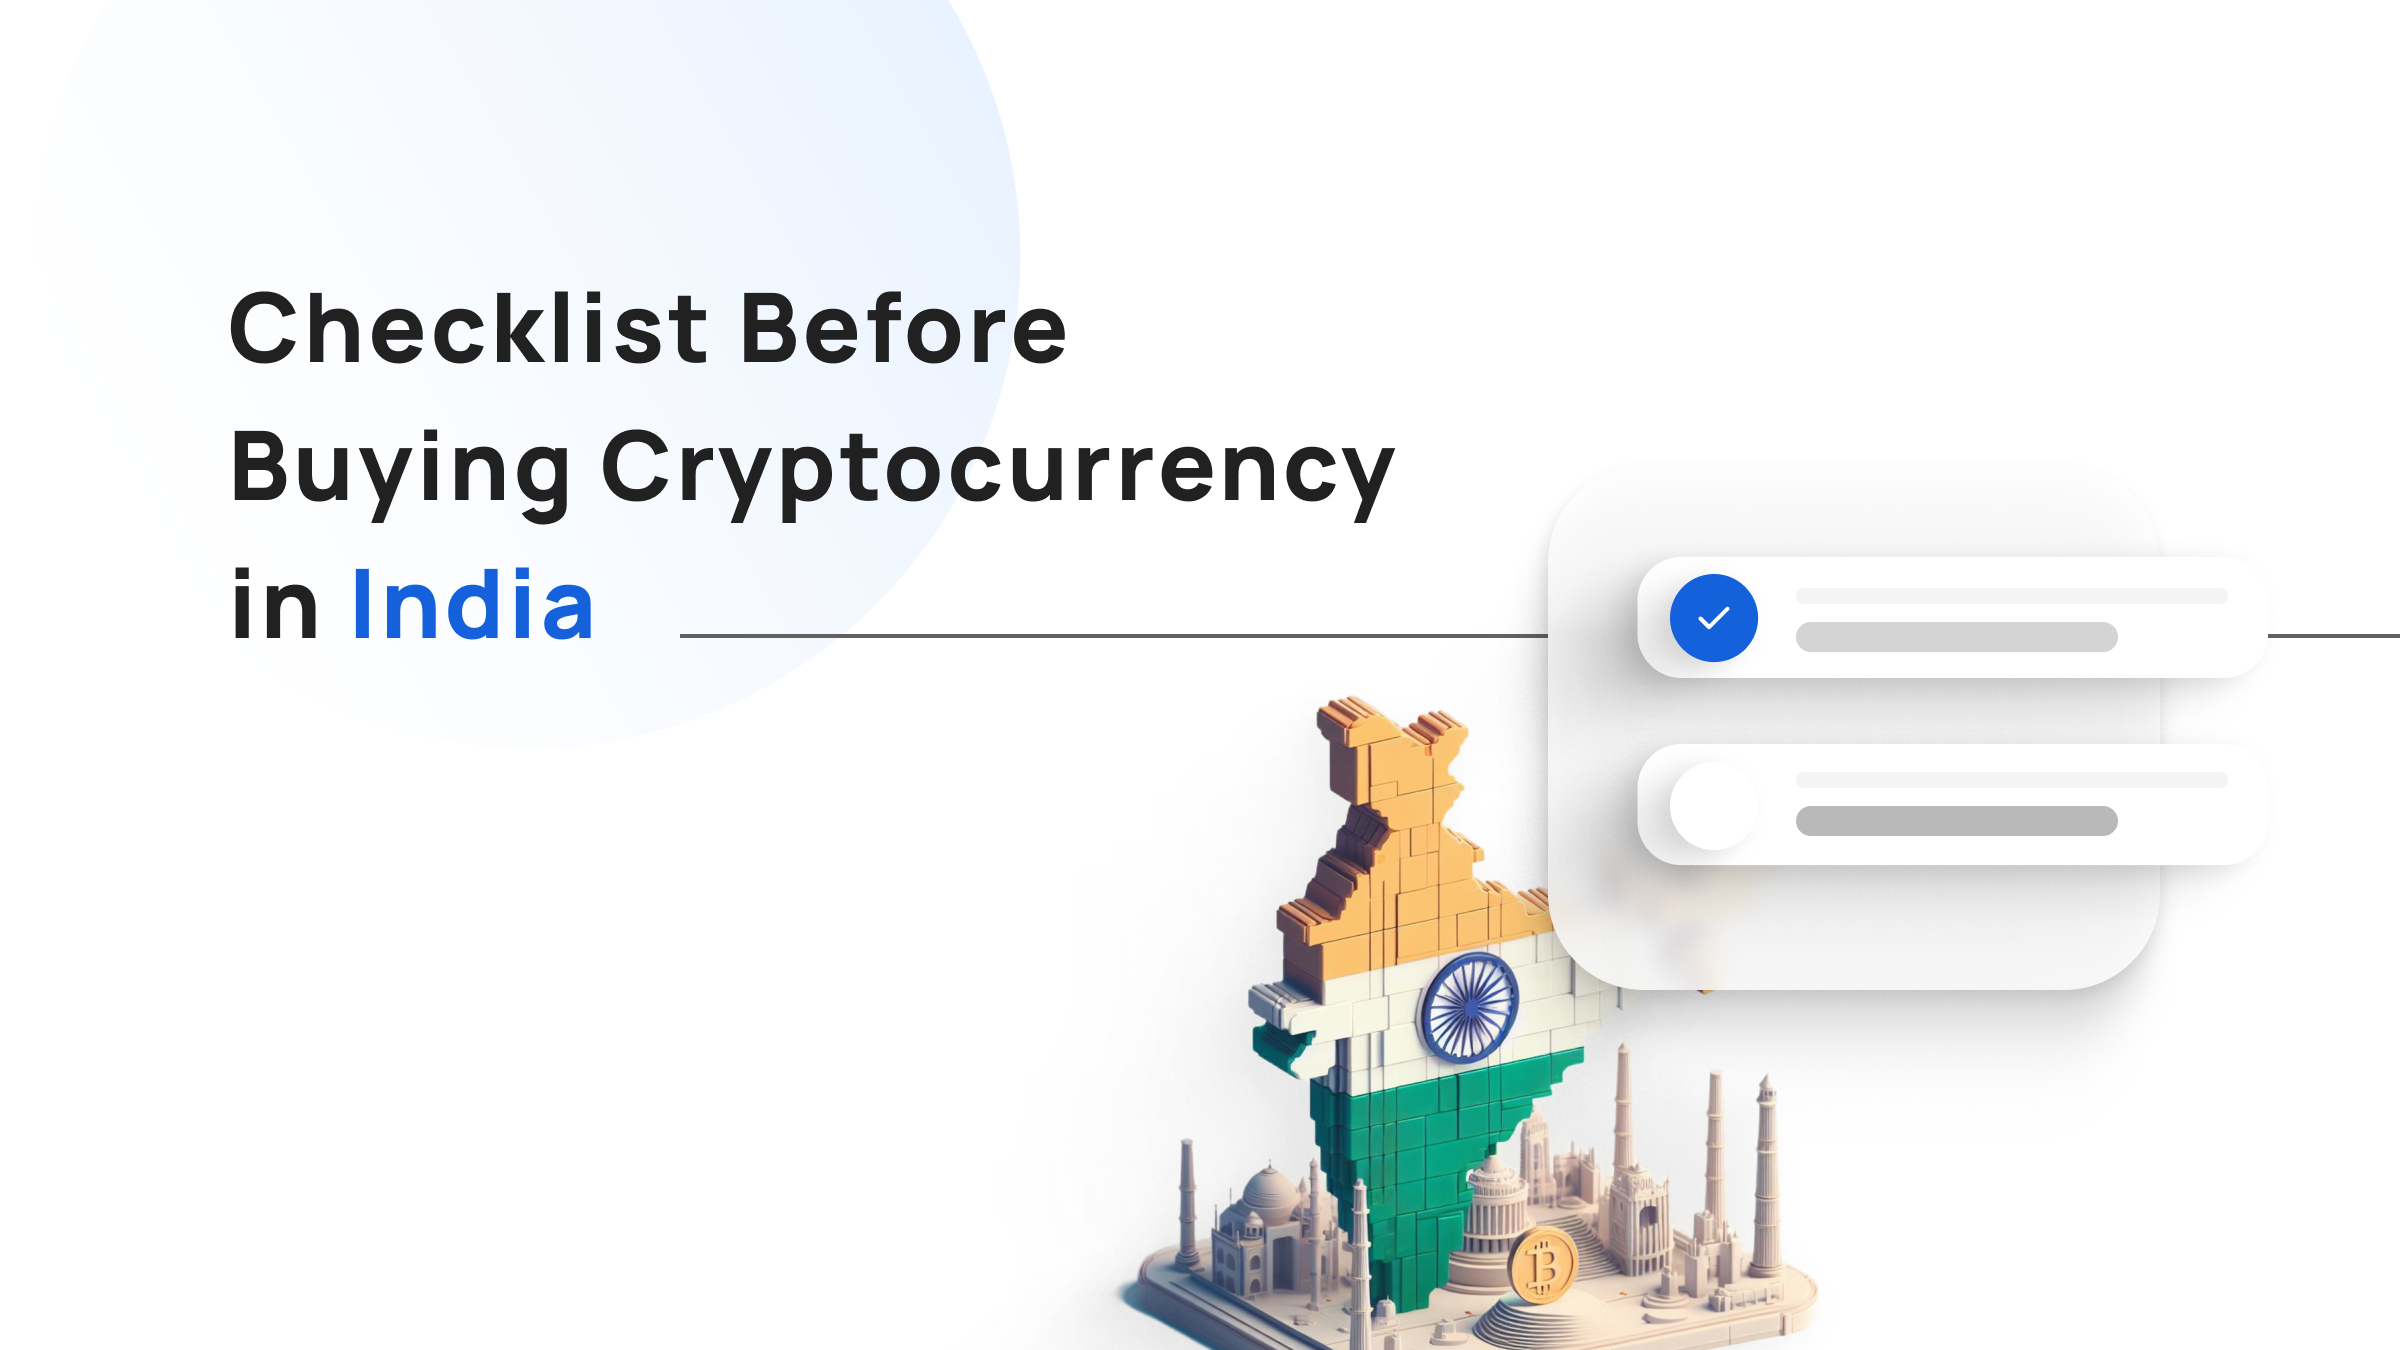 Checklist Before Buying Cryptocurrency in India